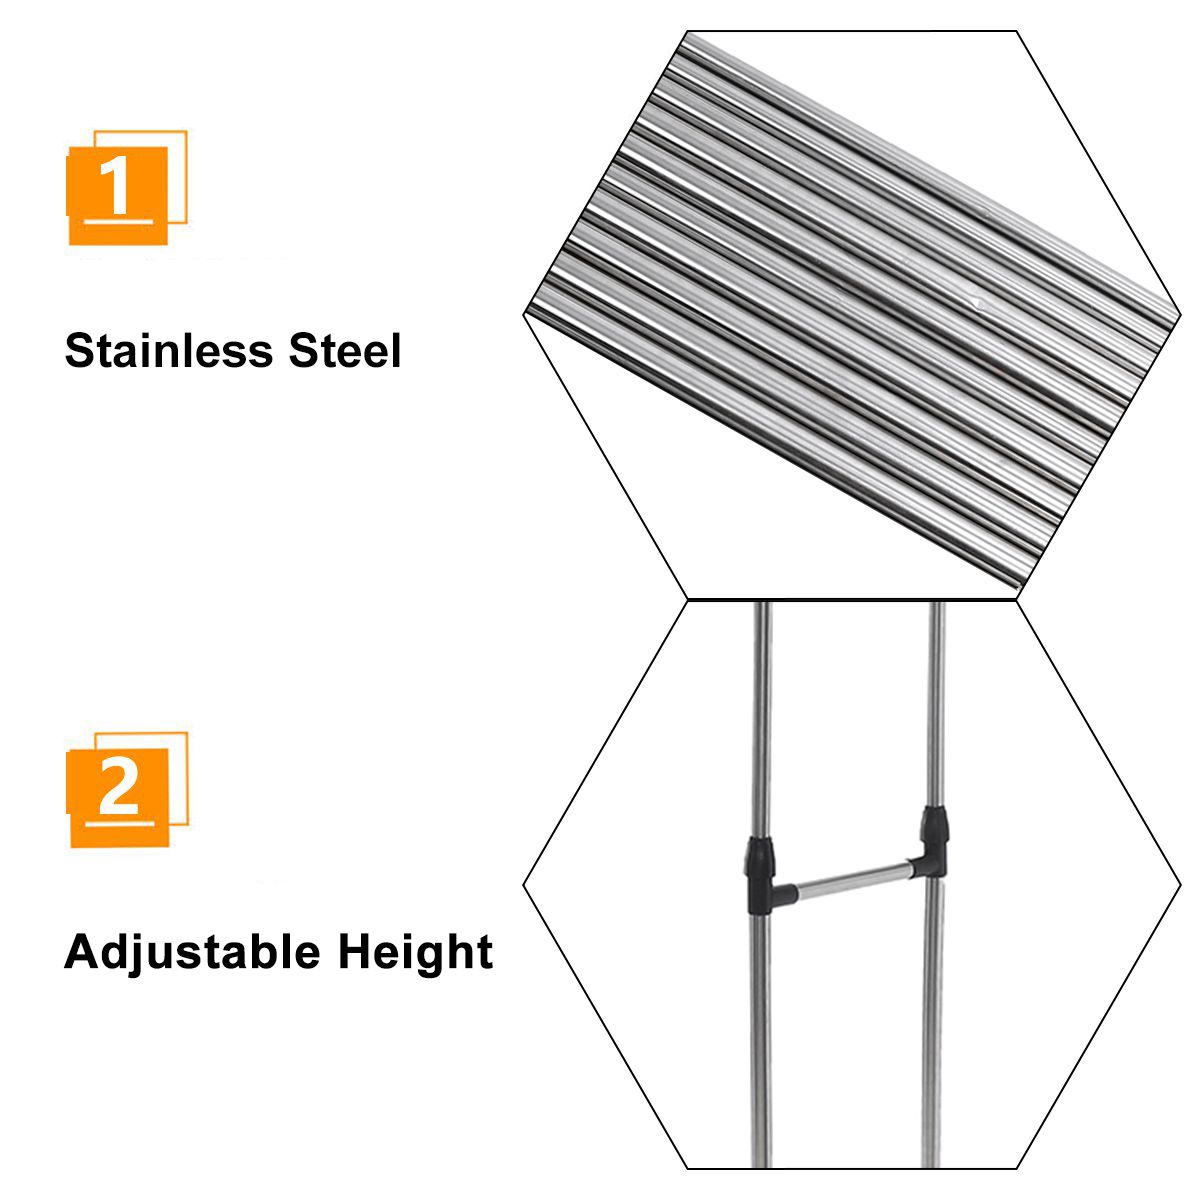 Adjustable-Stainless-Steel-Rolling-Rail-Movement-Cloth-Storage-Drying-Rack-Double-Bar-Hanger-Garment-1582826